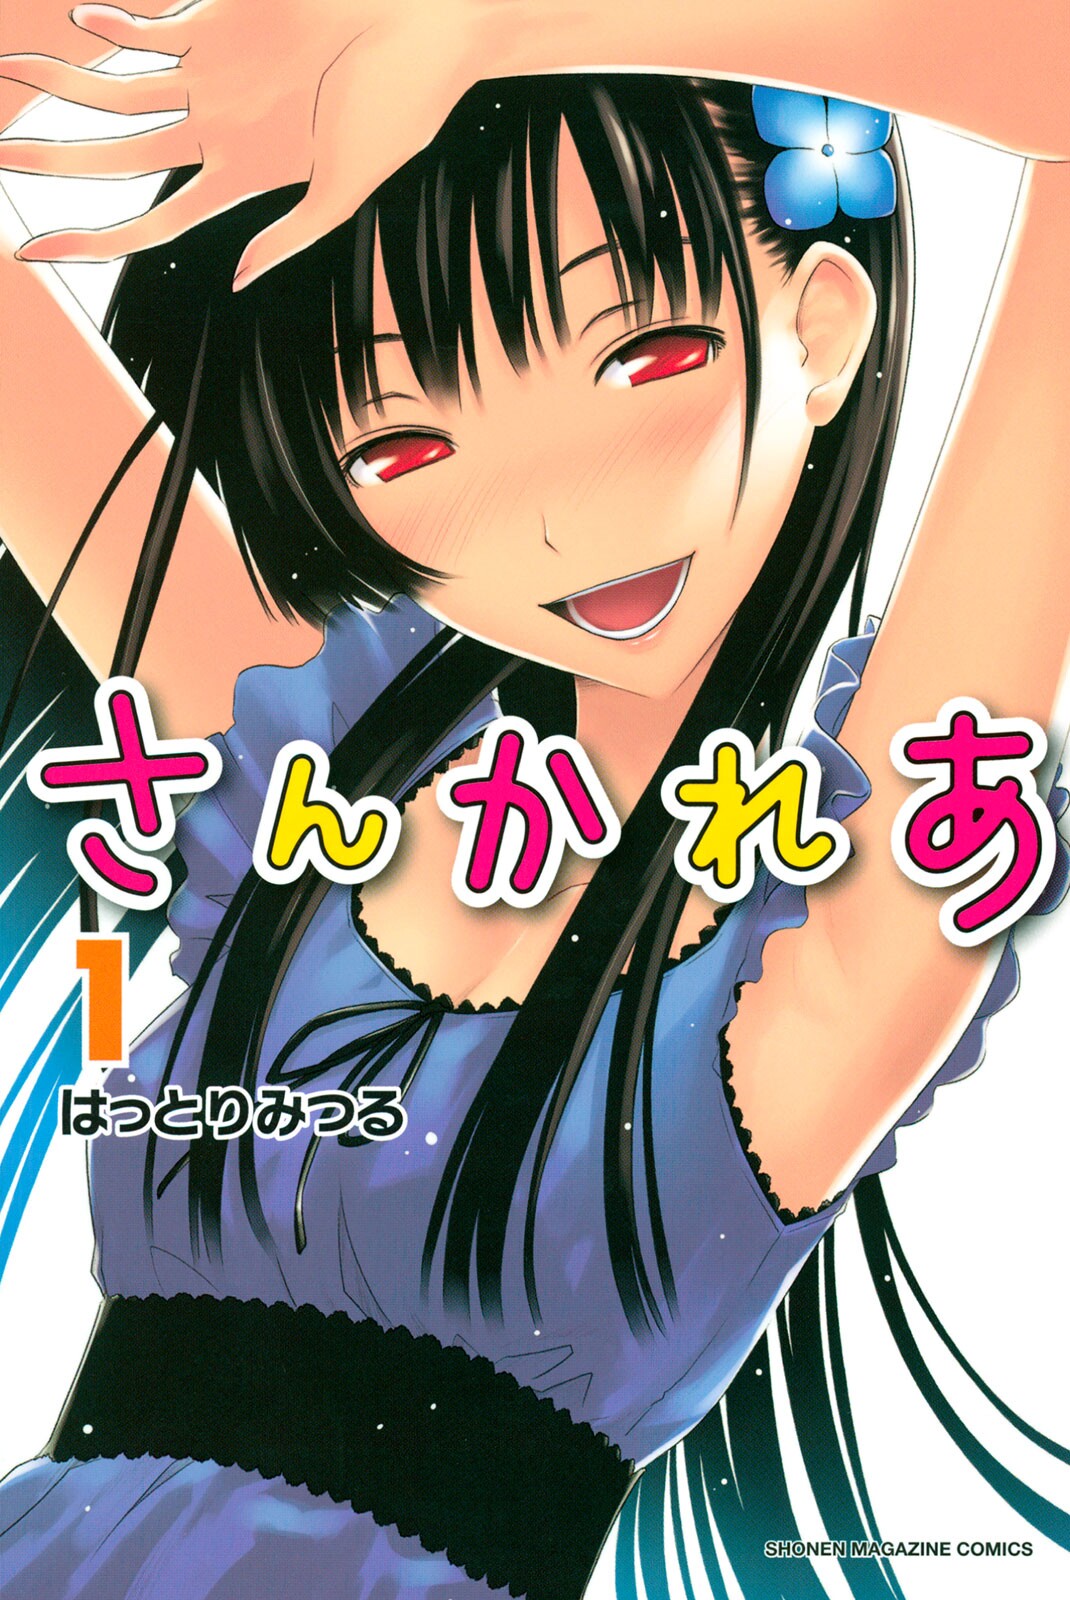 Sankarea: Undying Love Manga Review, by RoyalOss | Anime-Planet